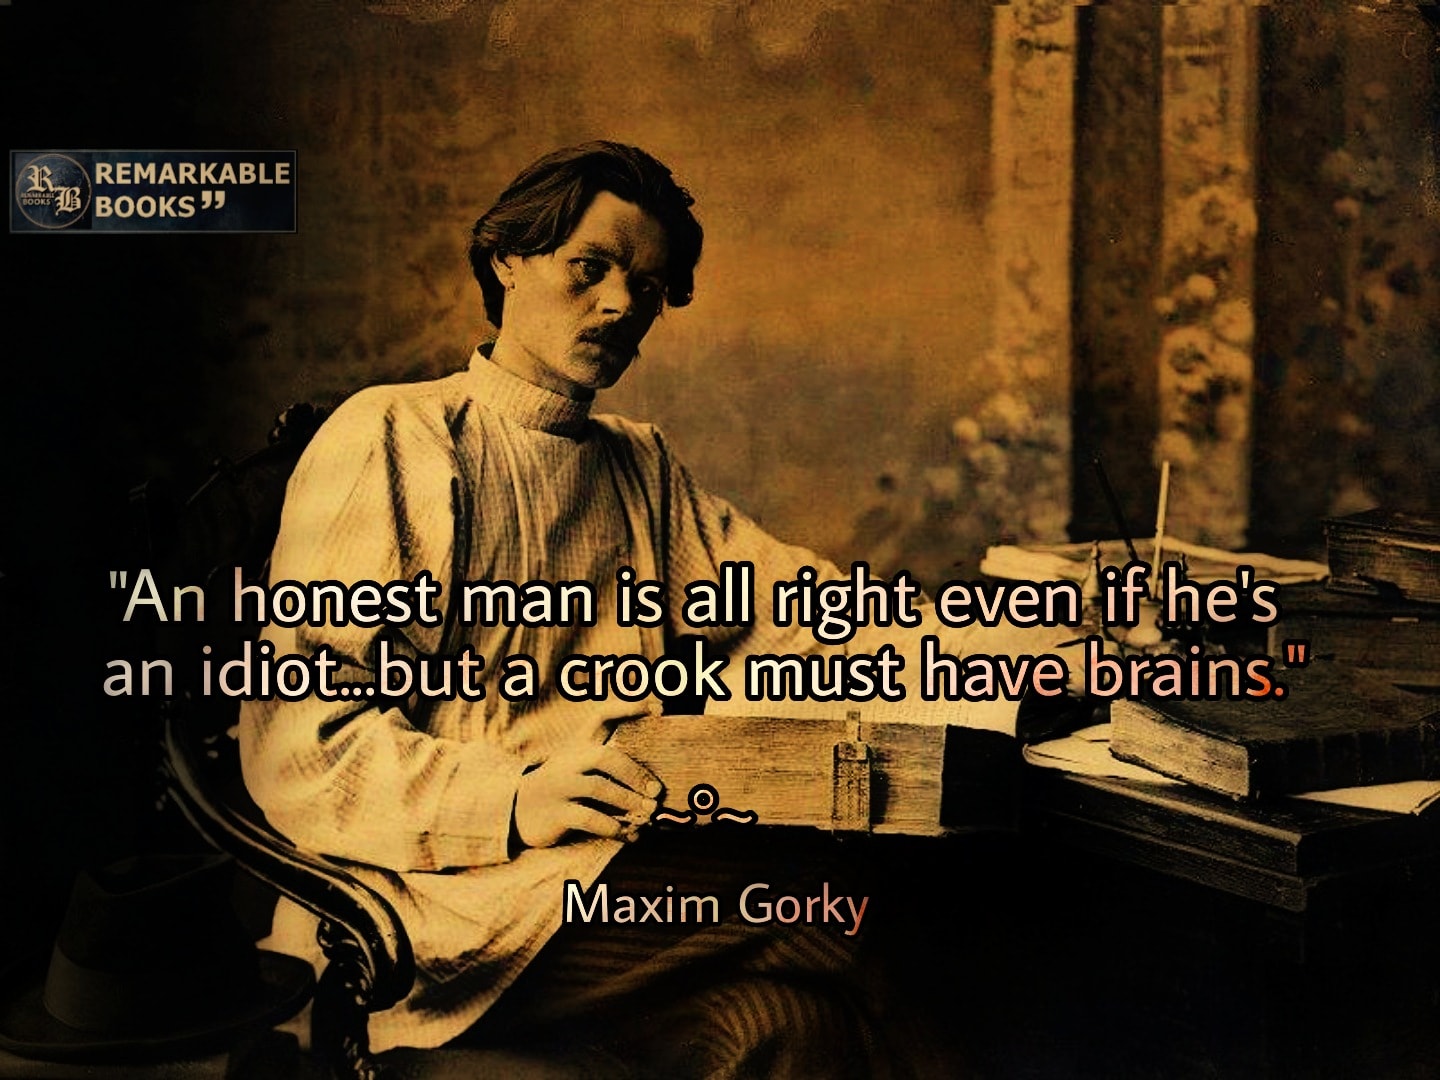 An honest man is all right even if he’s an idiot…but a crook must have brains.